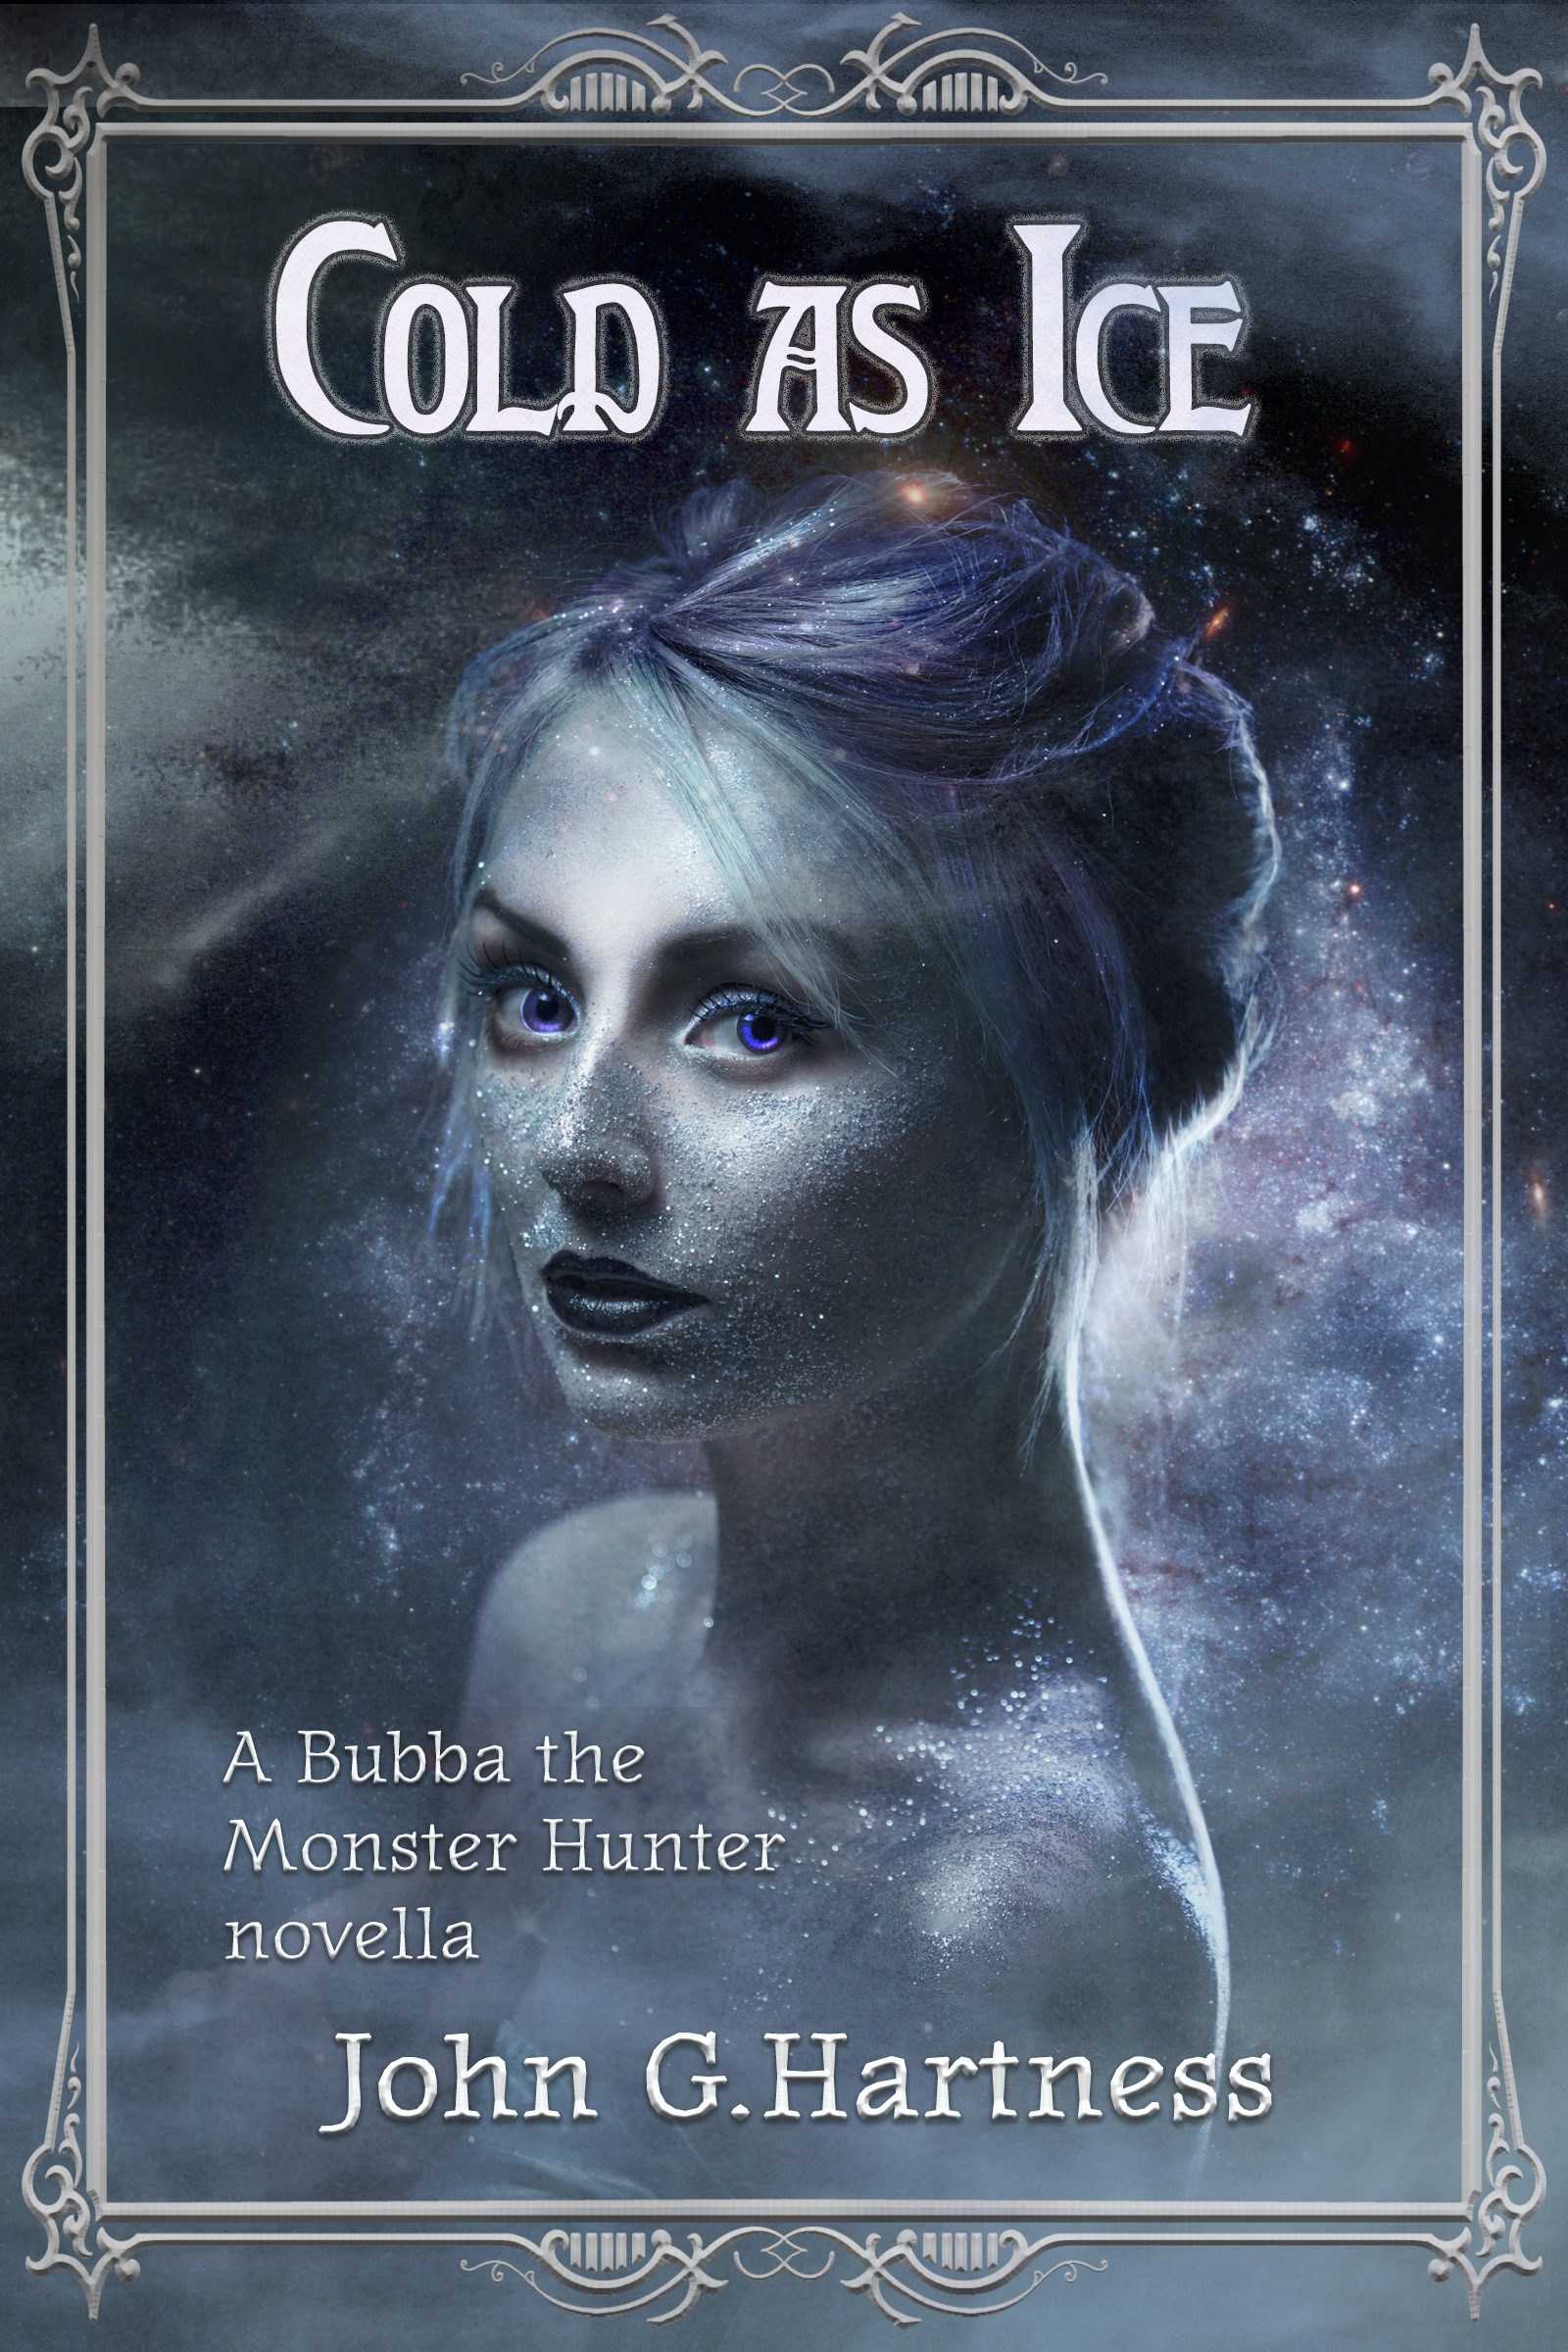 Cover Reveal – Cold as Ice